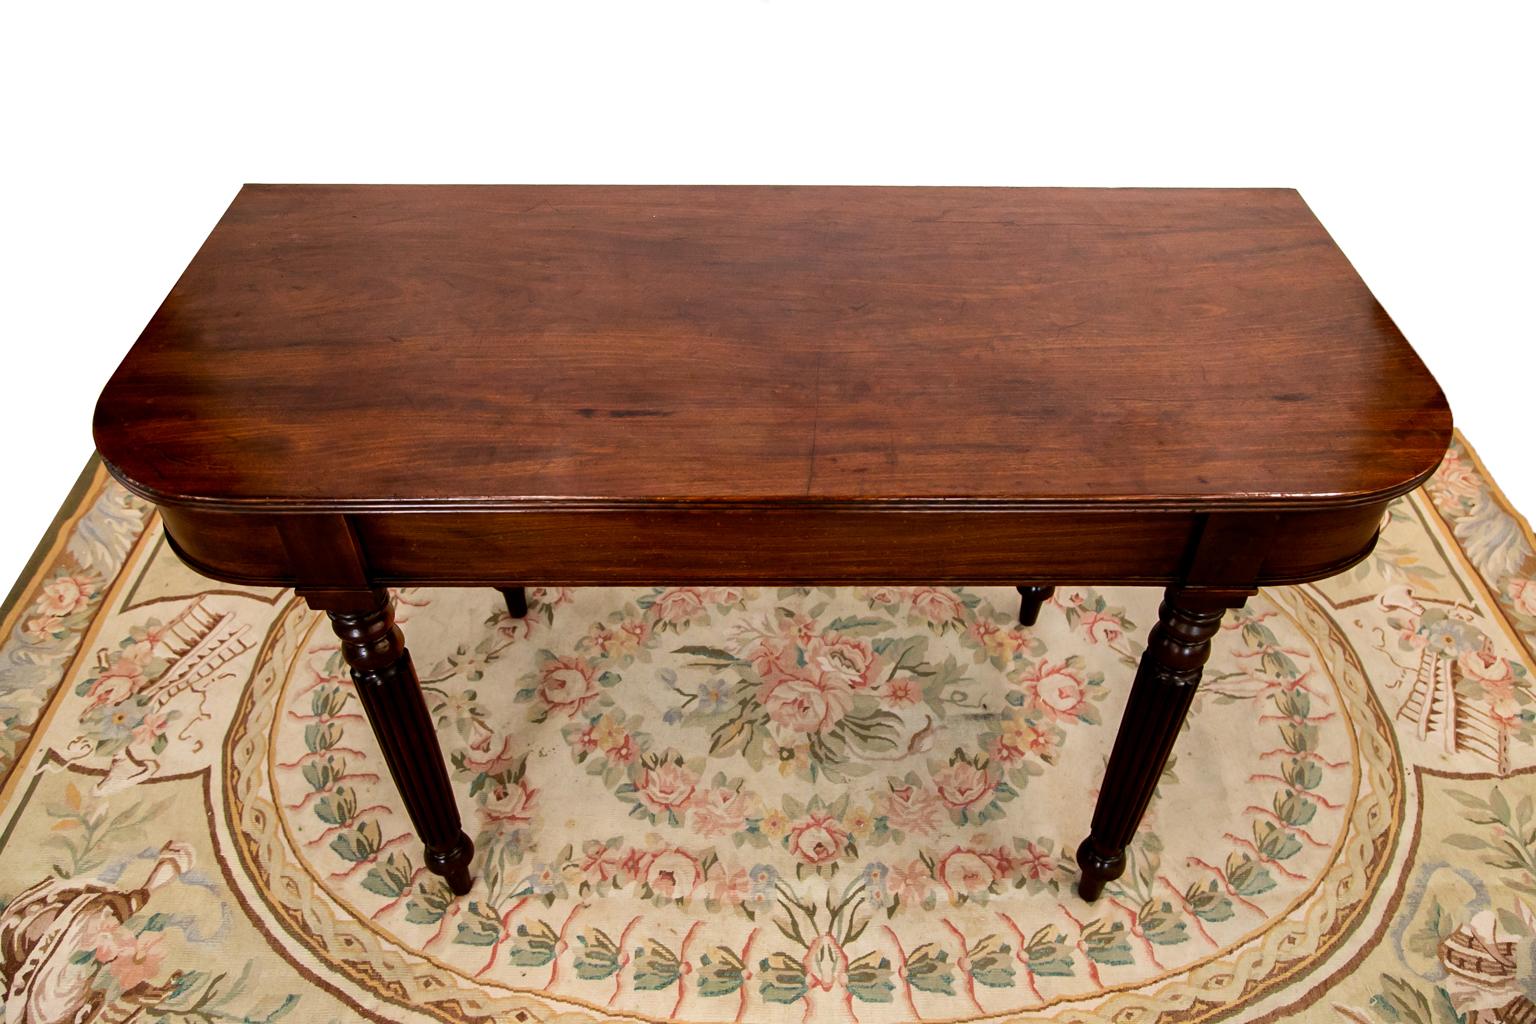 The top of this mahogany table has a reeded edge. The legs have heavy reeding.